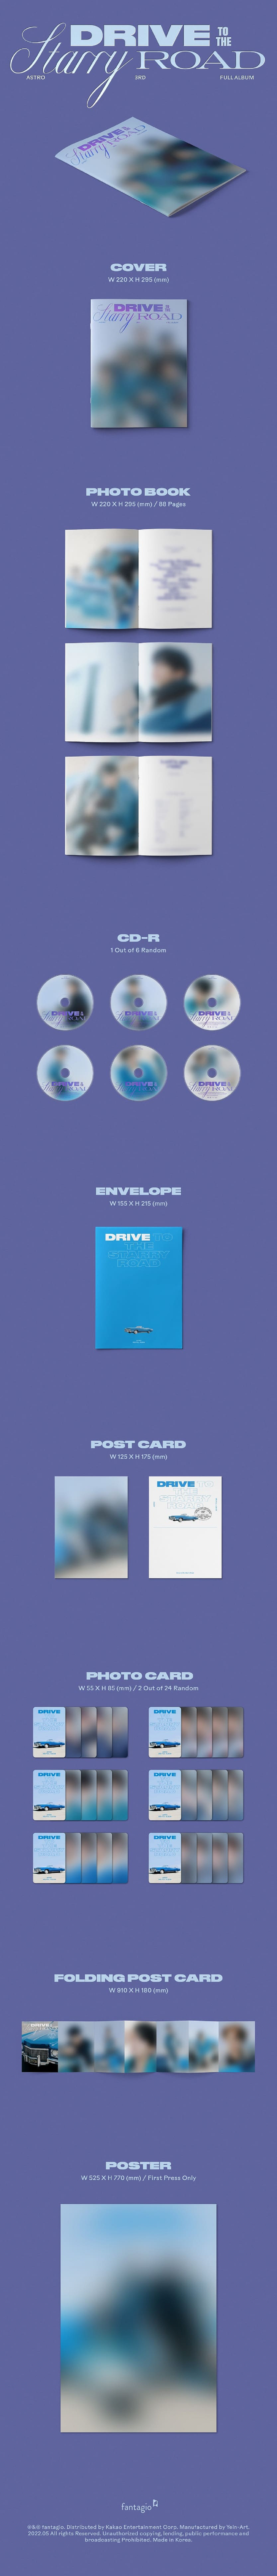 astro-3rd-album-drive-to-the-starry-road-contents